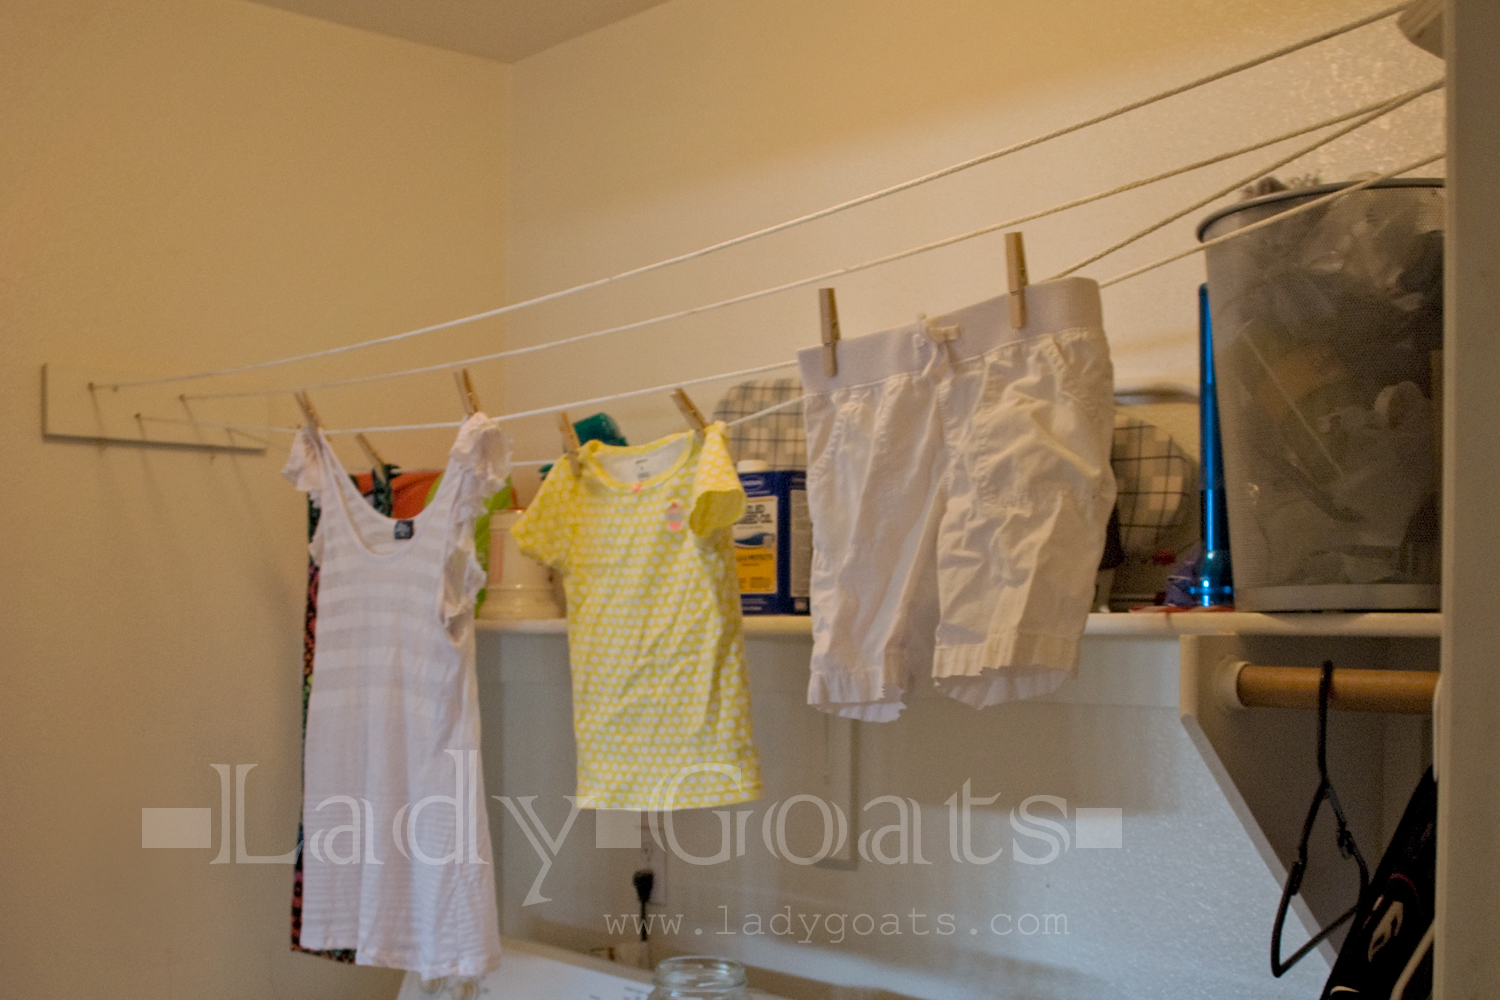 Lady Goats: Free (or Very Cheap) DIY Indoor Clothesline